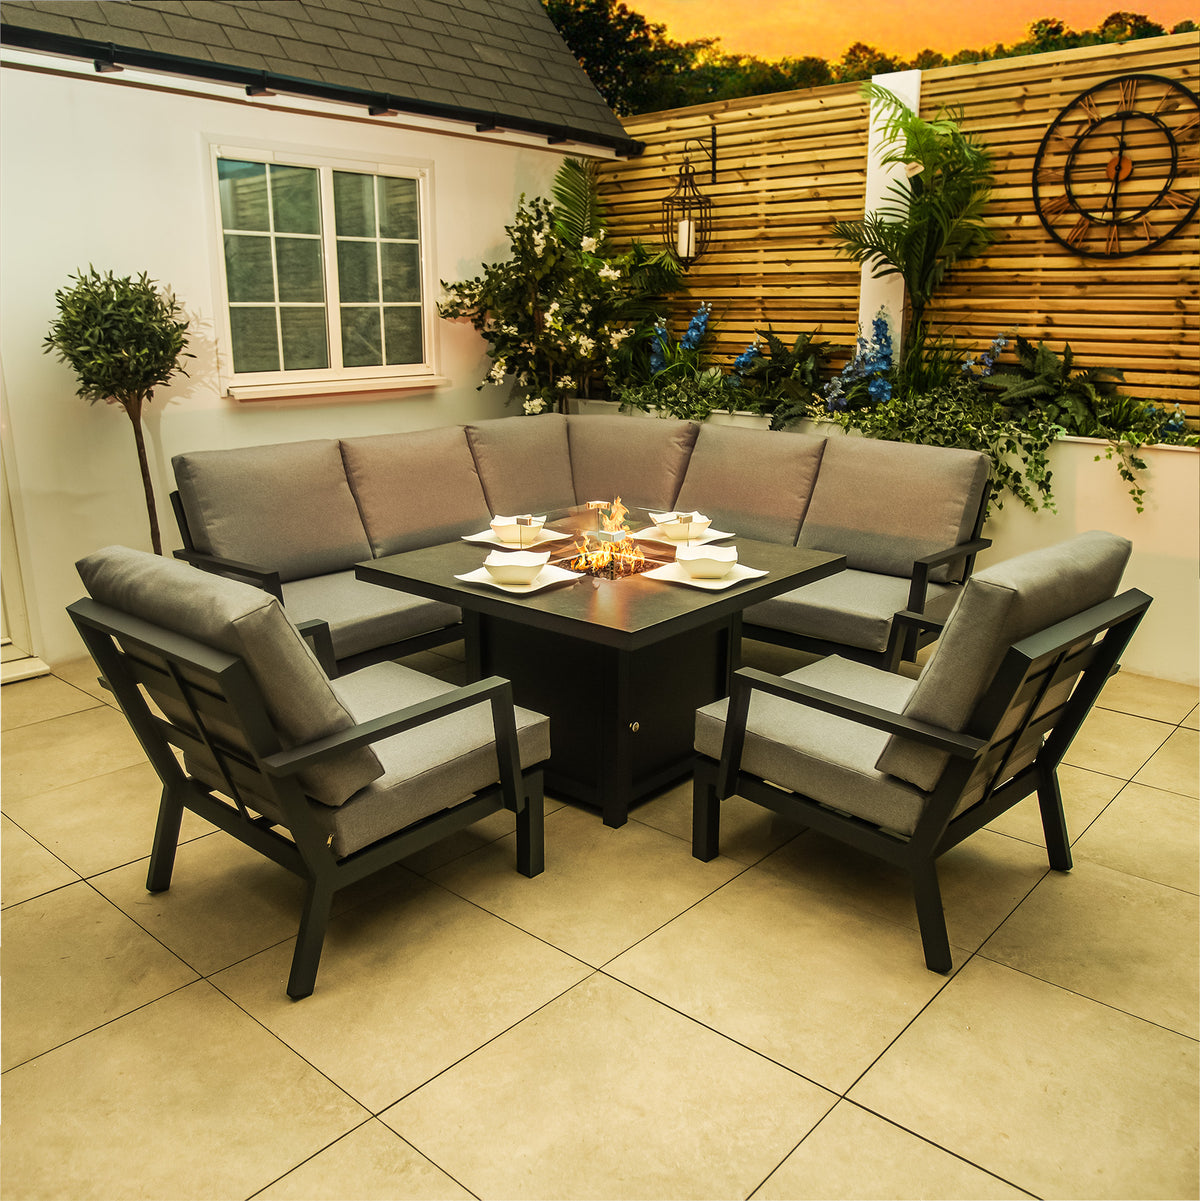 Bracken Outdoors Miami Dark Aluminium Compact Corner Set with Fire Pit Table and 2 Arm Chairs